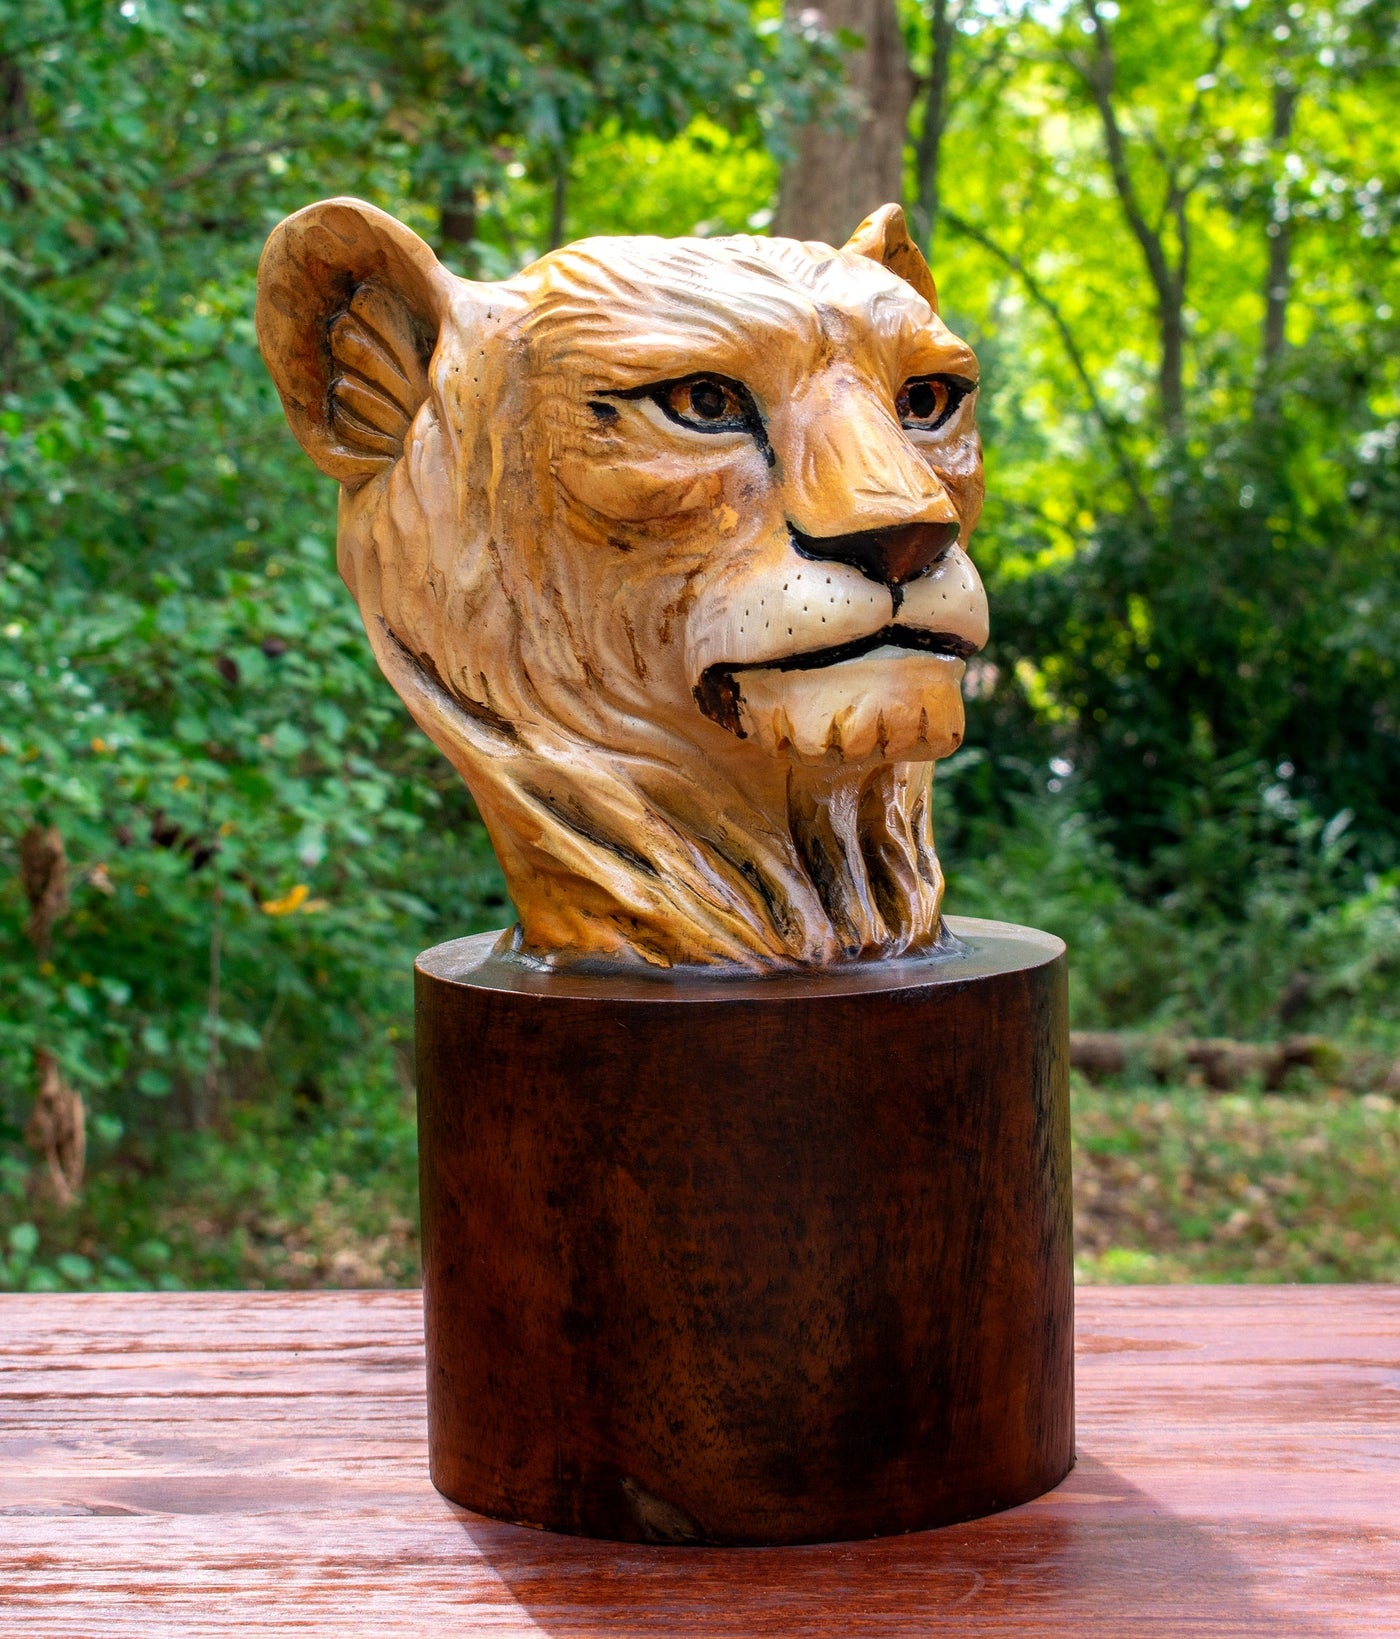 16" Solid Wood Hand Carved Tiger Statue Head Sculpture Art Decorative Home Decor Accent Lodge Wooden Handmade Figurine Handcrafted Decoration